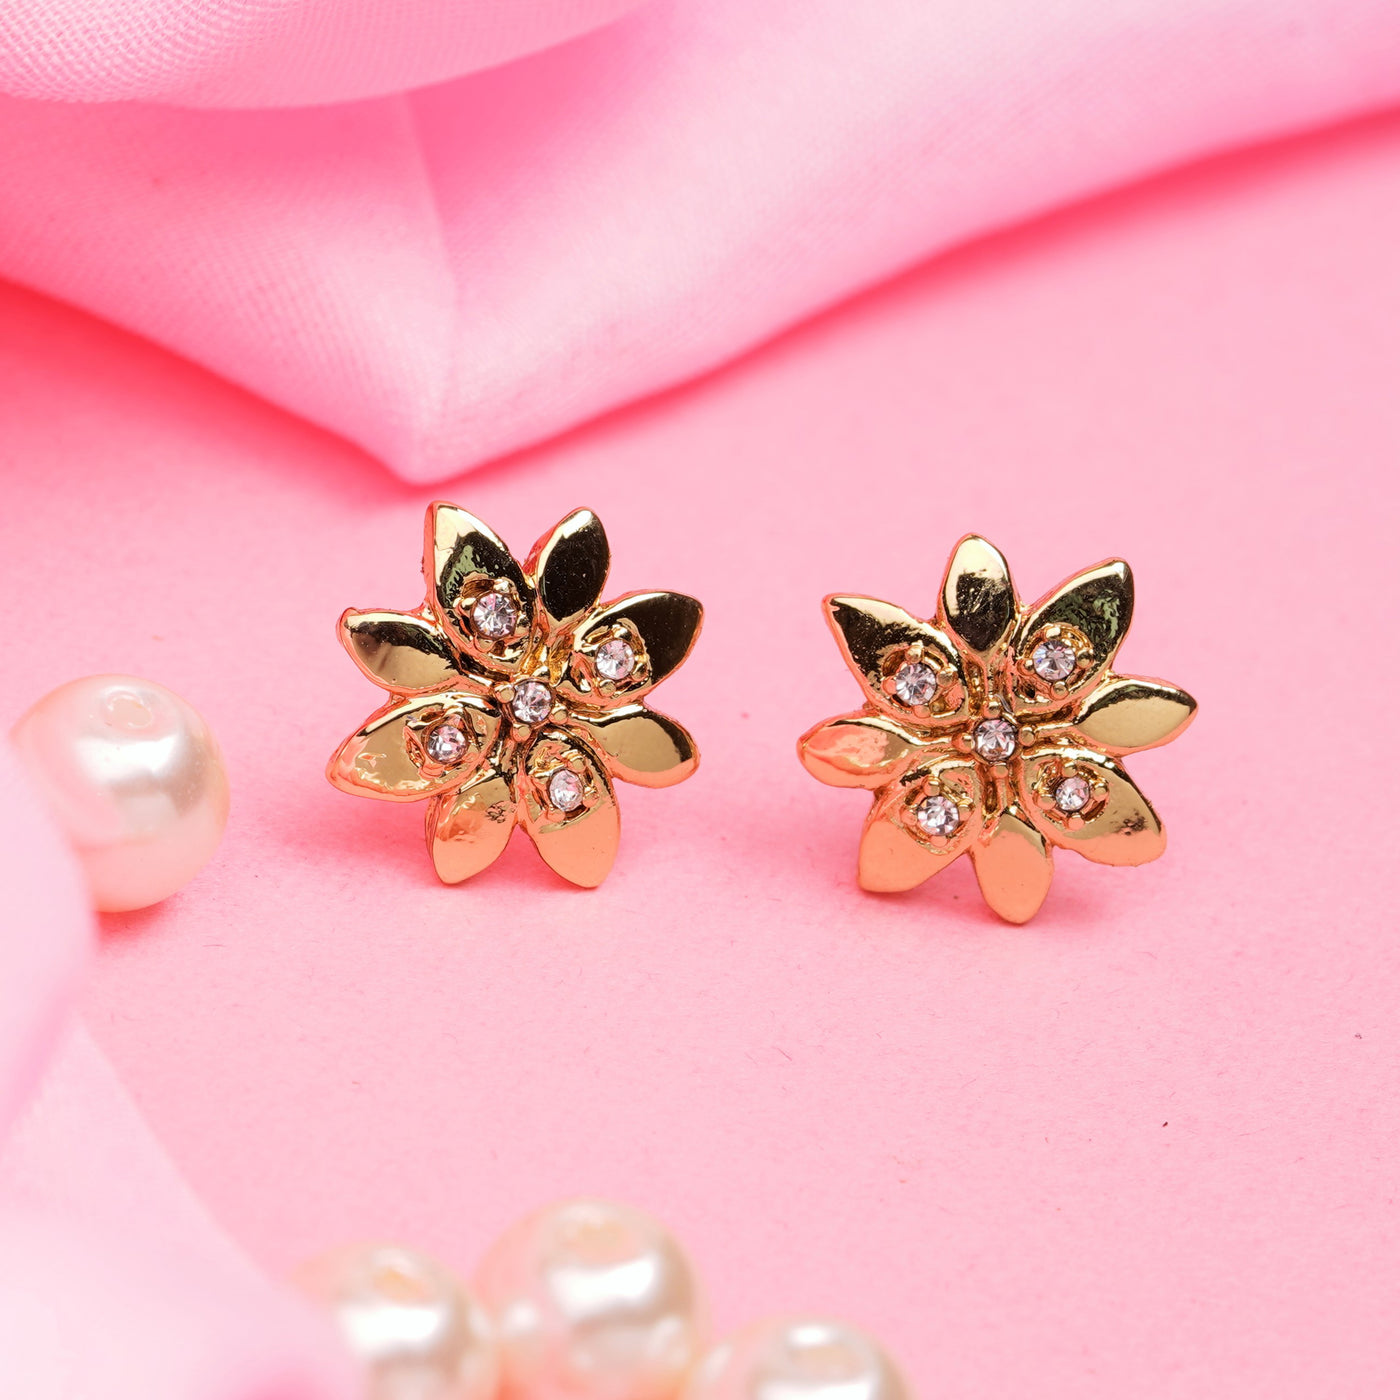 Estele Gold Plated Flower Stud Earrings with Crystals for Women